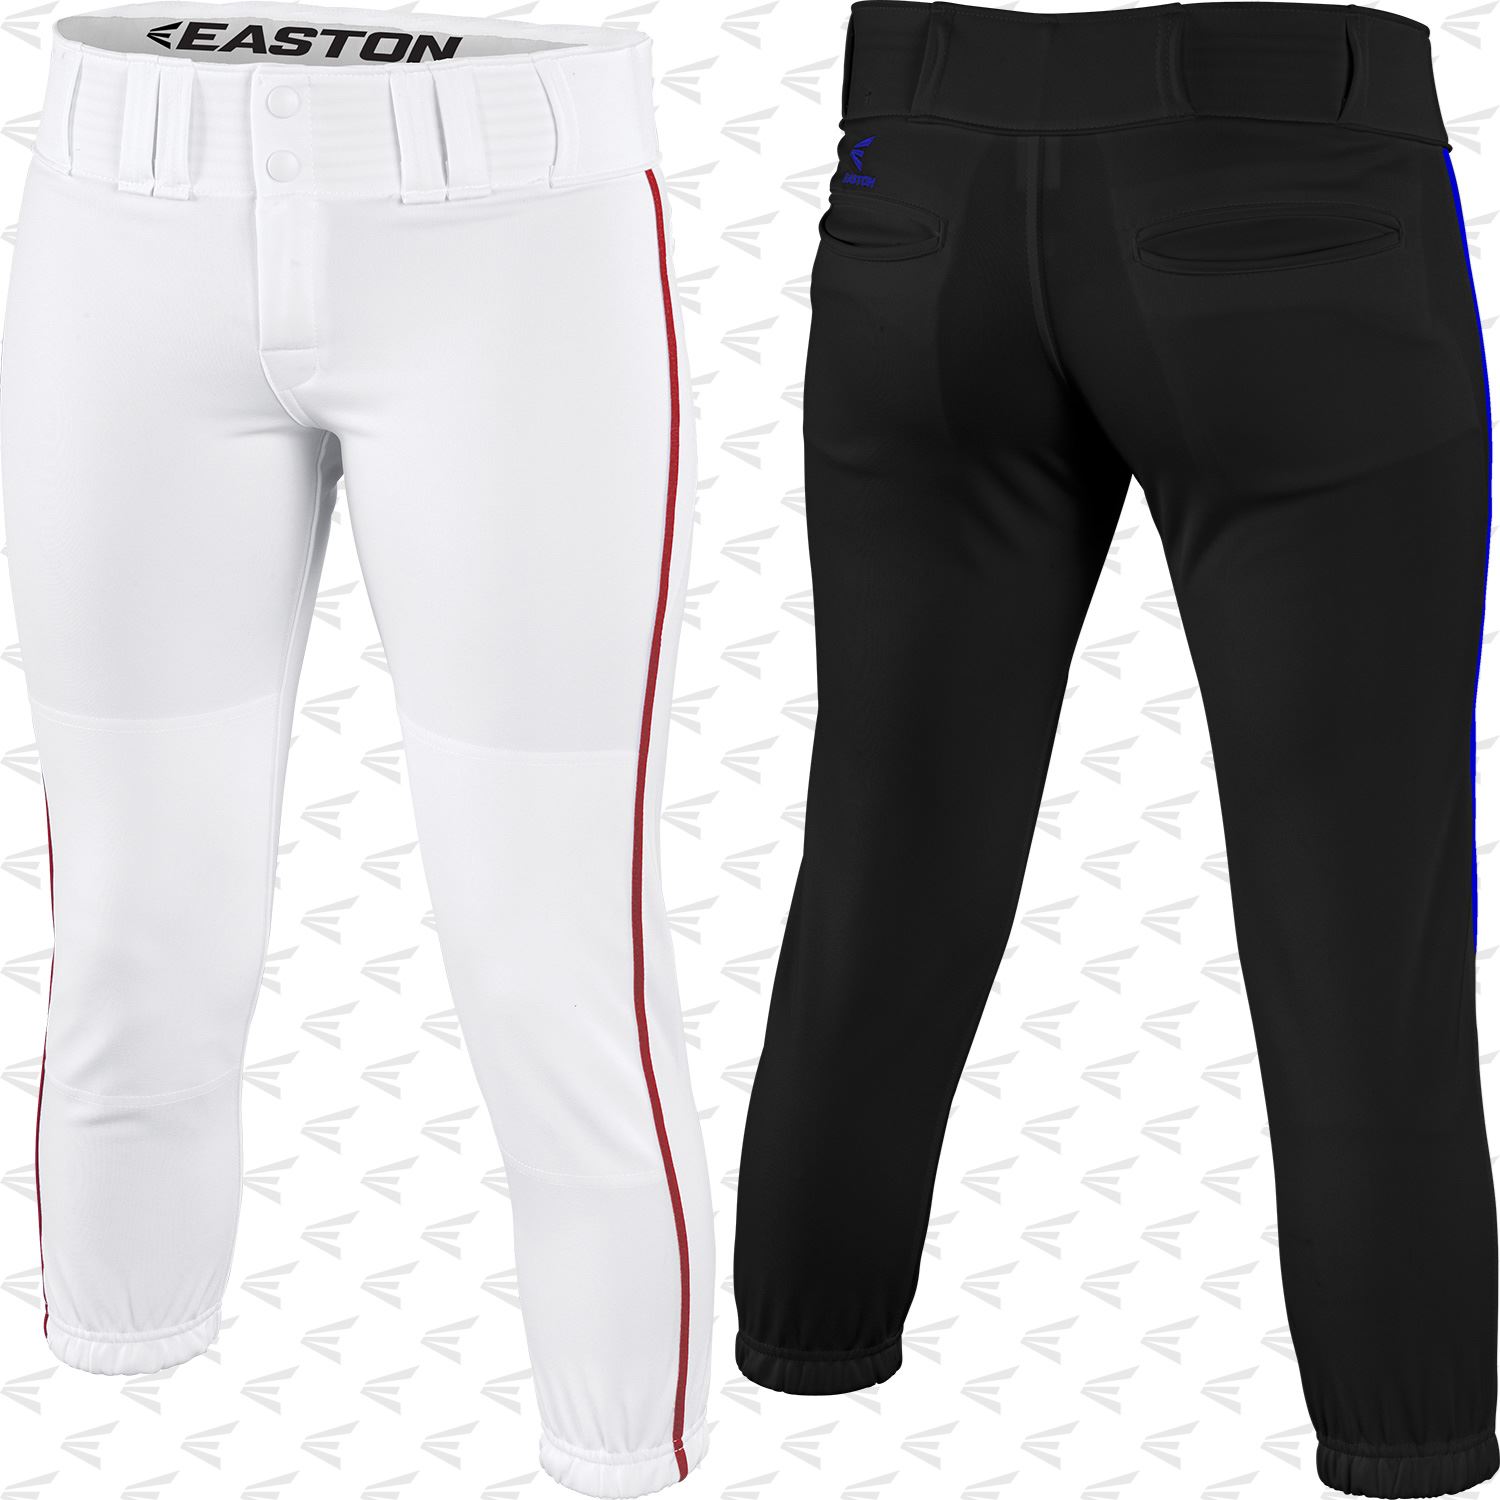 Details about   2 pair of Easton Pro Women's Fastpitch Softball Pant XXL Brand New White 